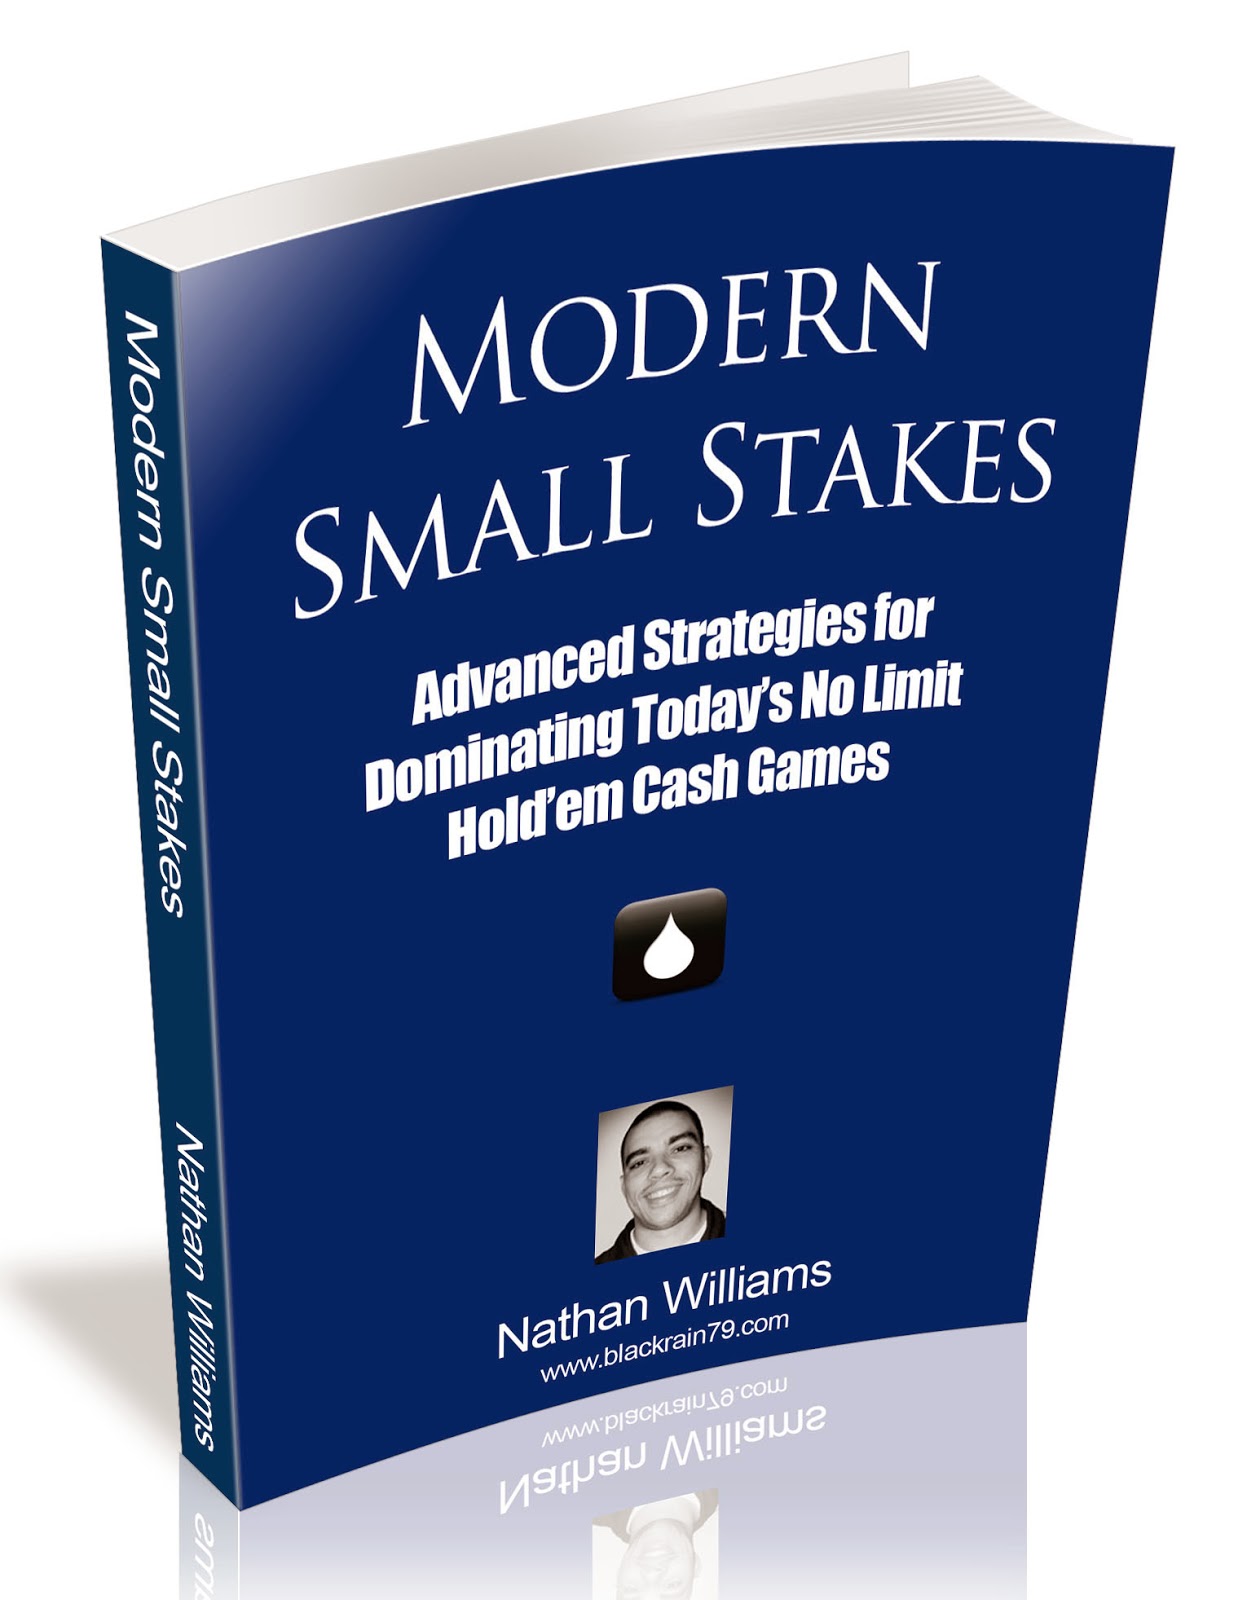 Announcing the Release of my 2nd Book "Modern Small Stakes"